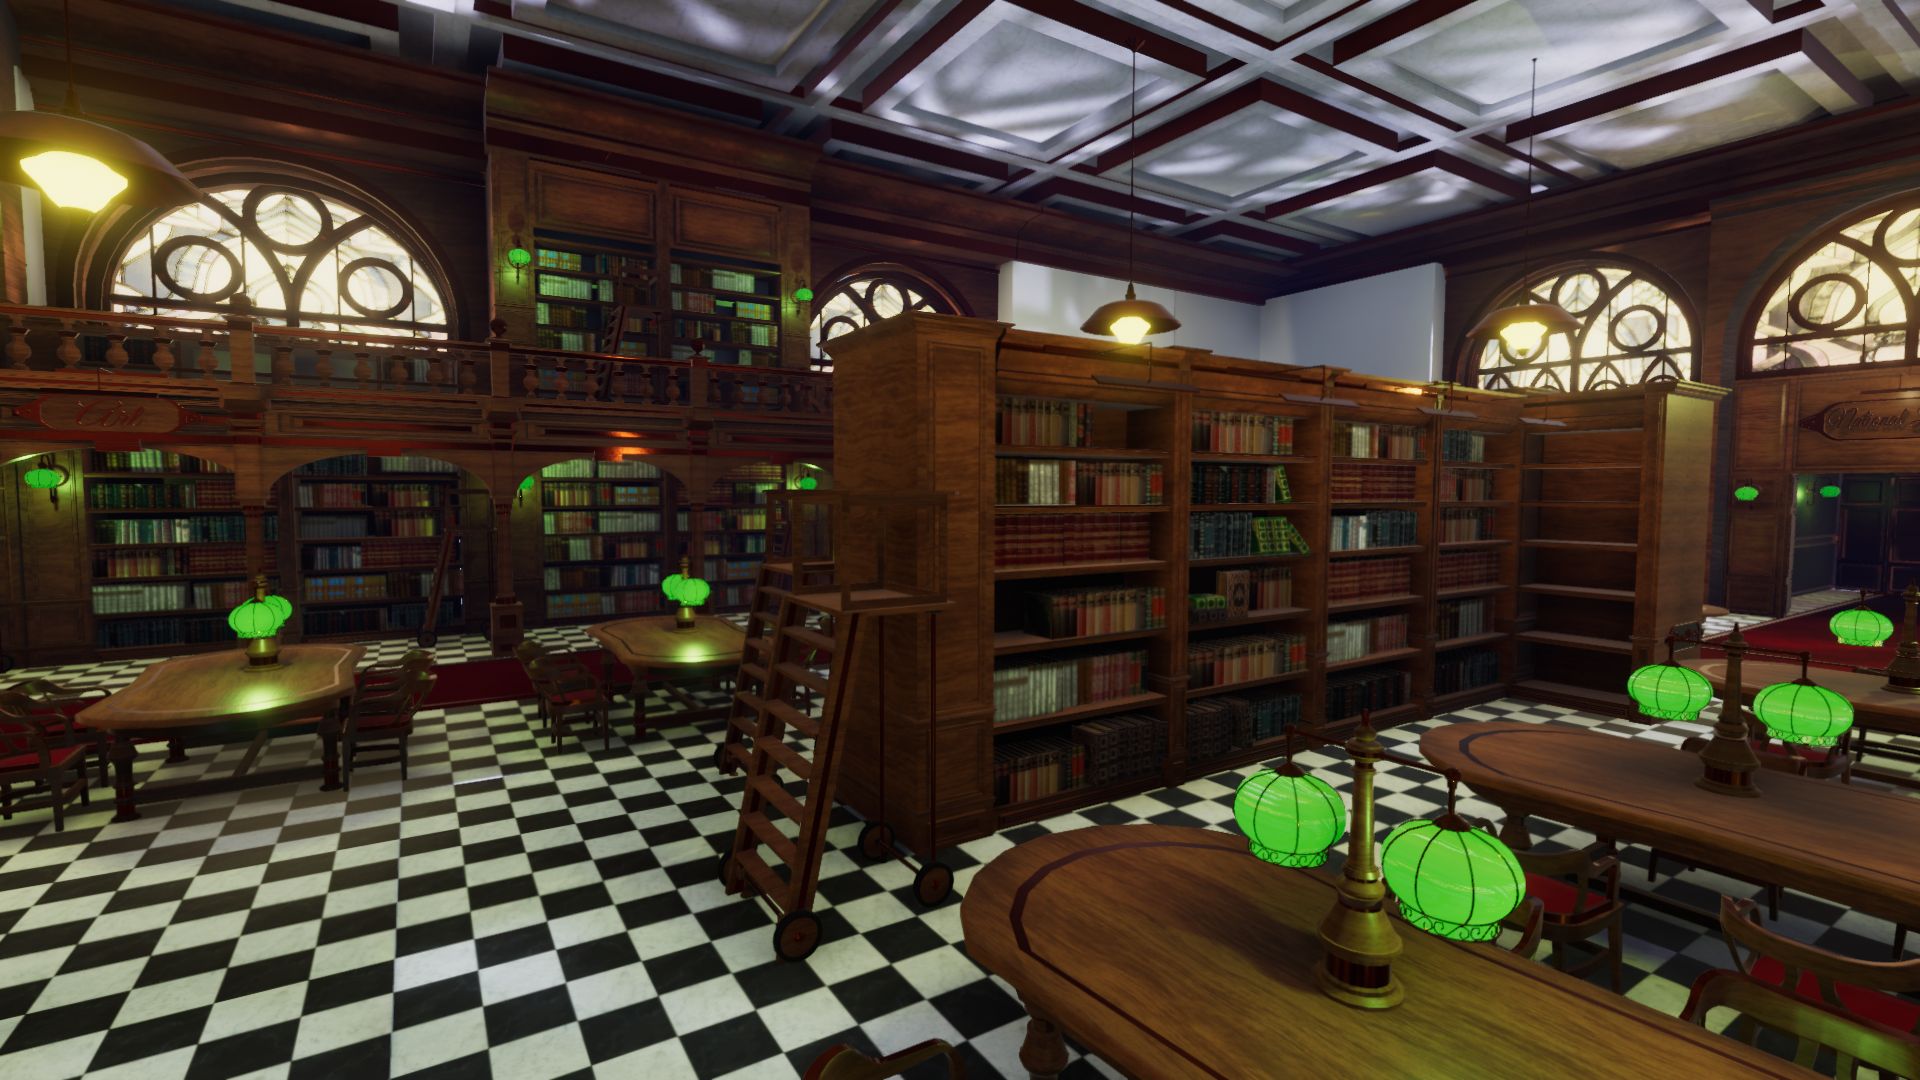 An image showing National Library asset pack, created with Unity Engine.